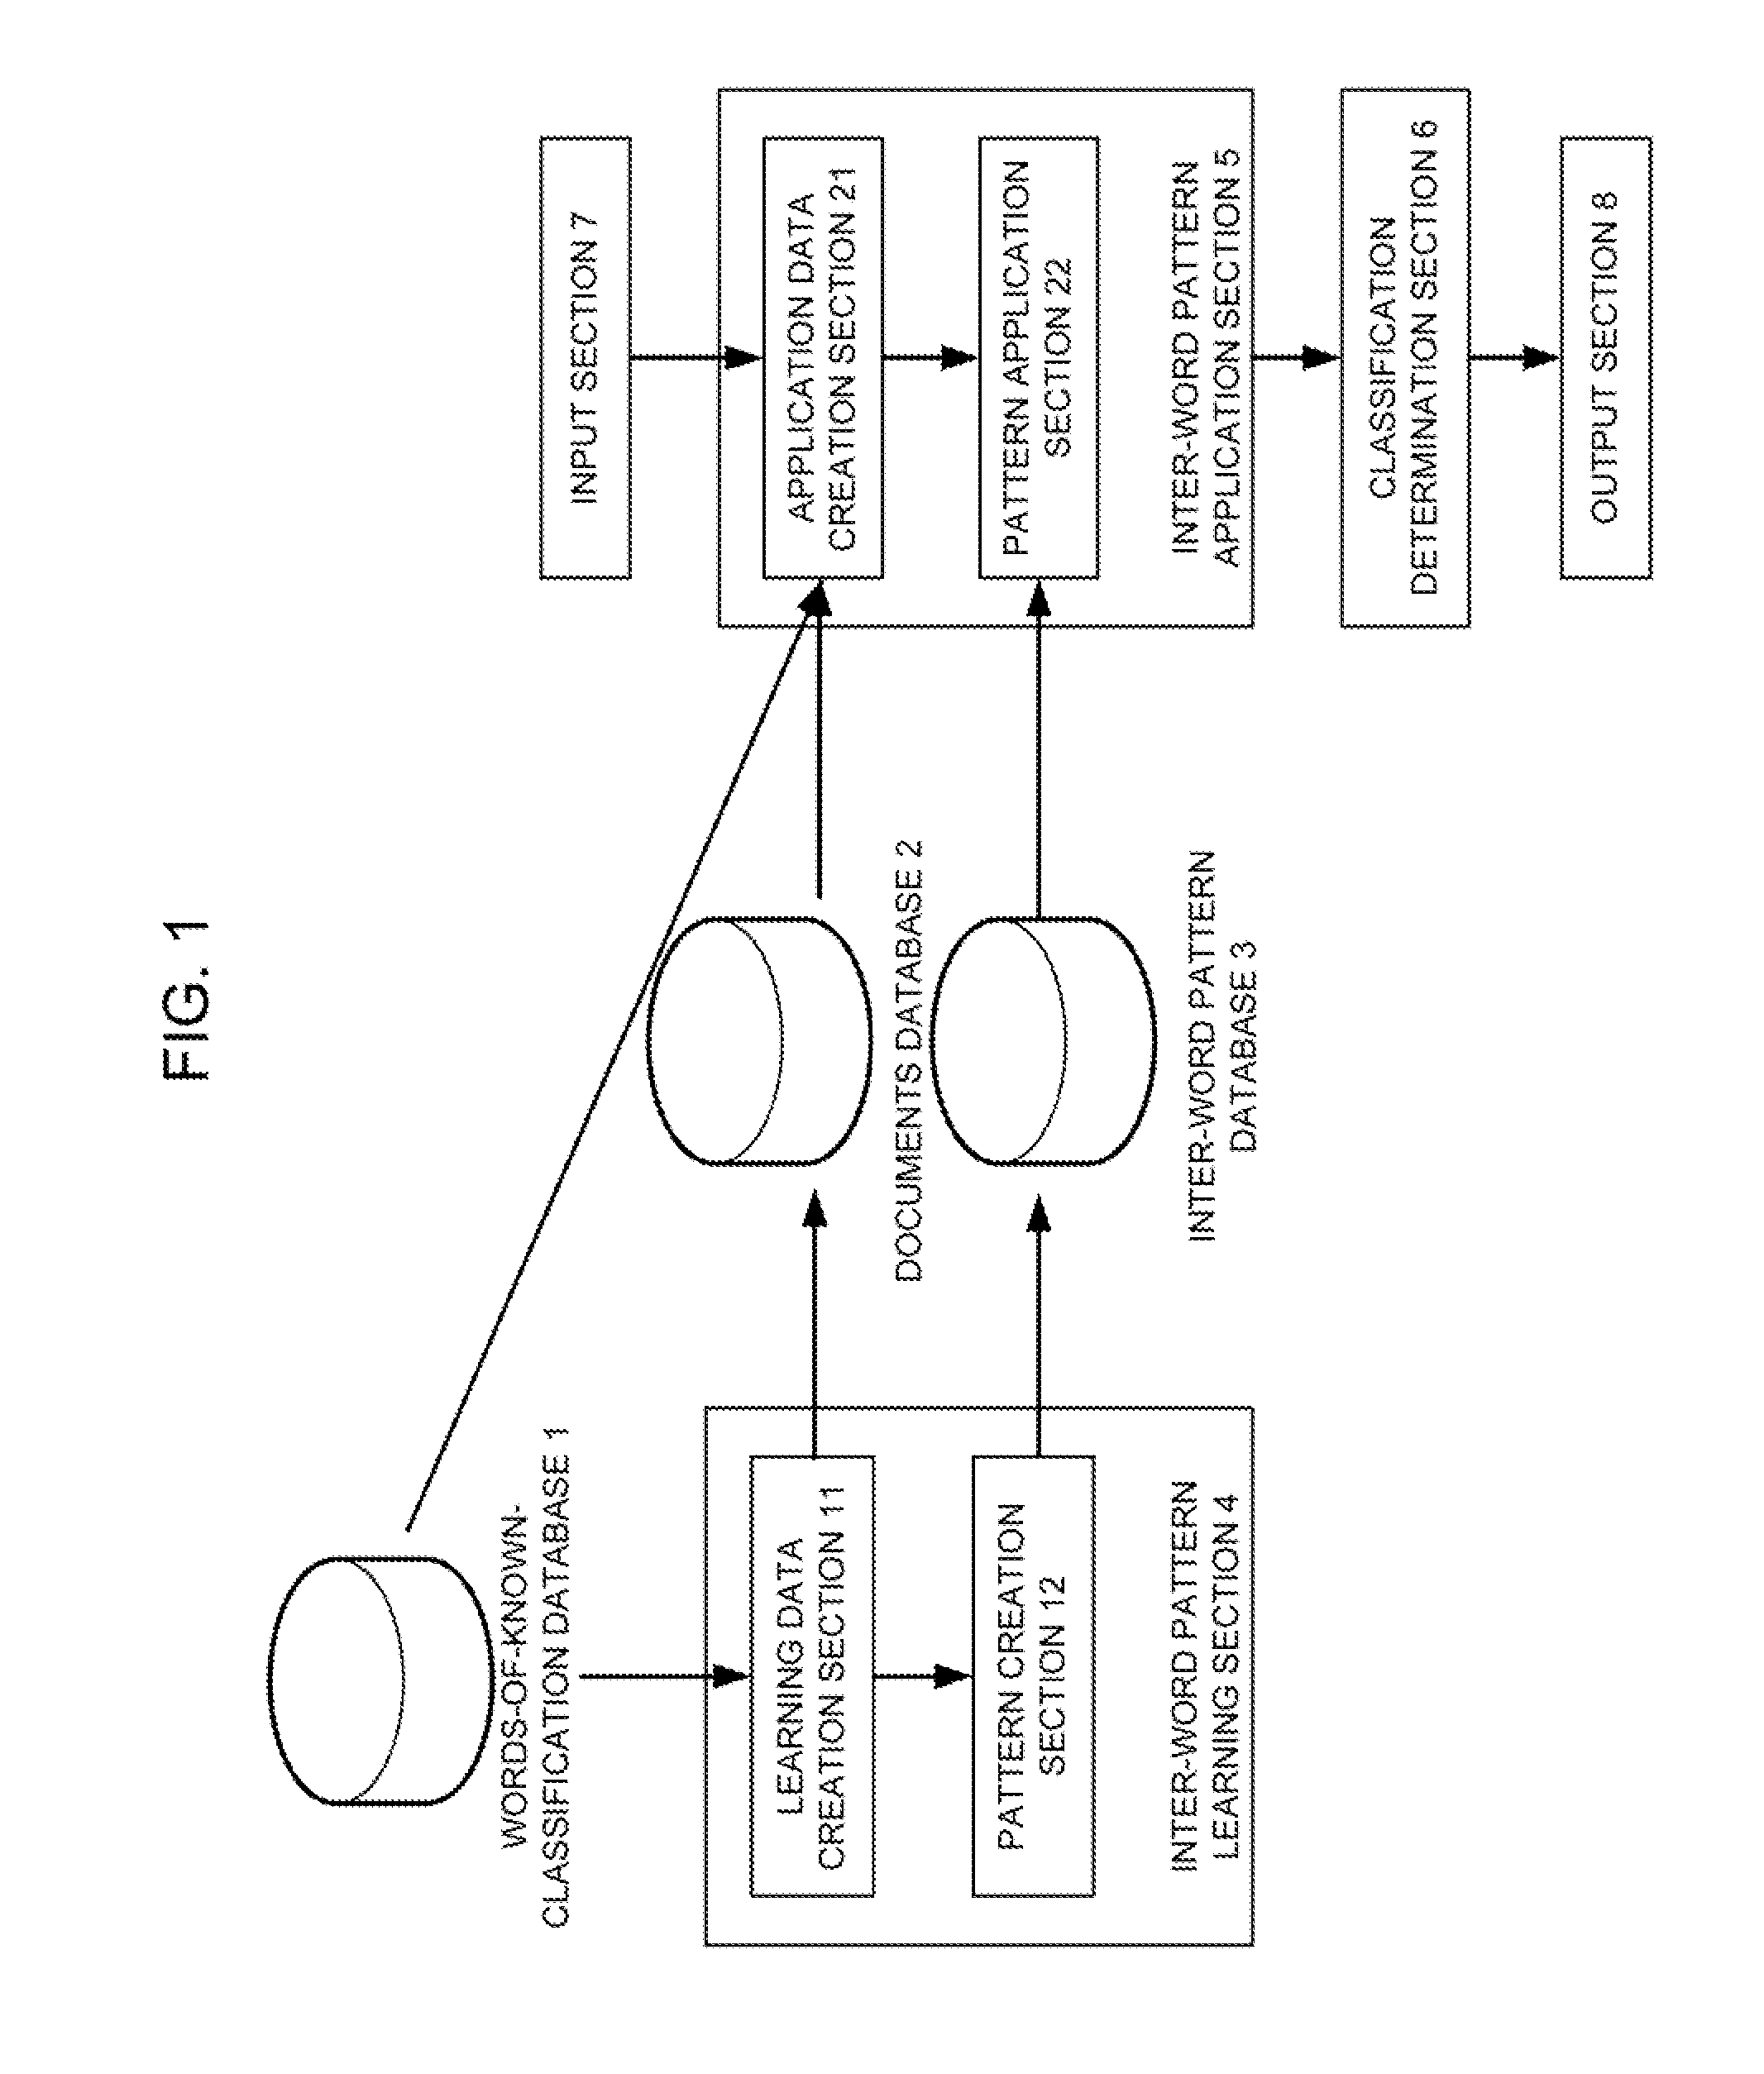 Word classification system, method, and program